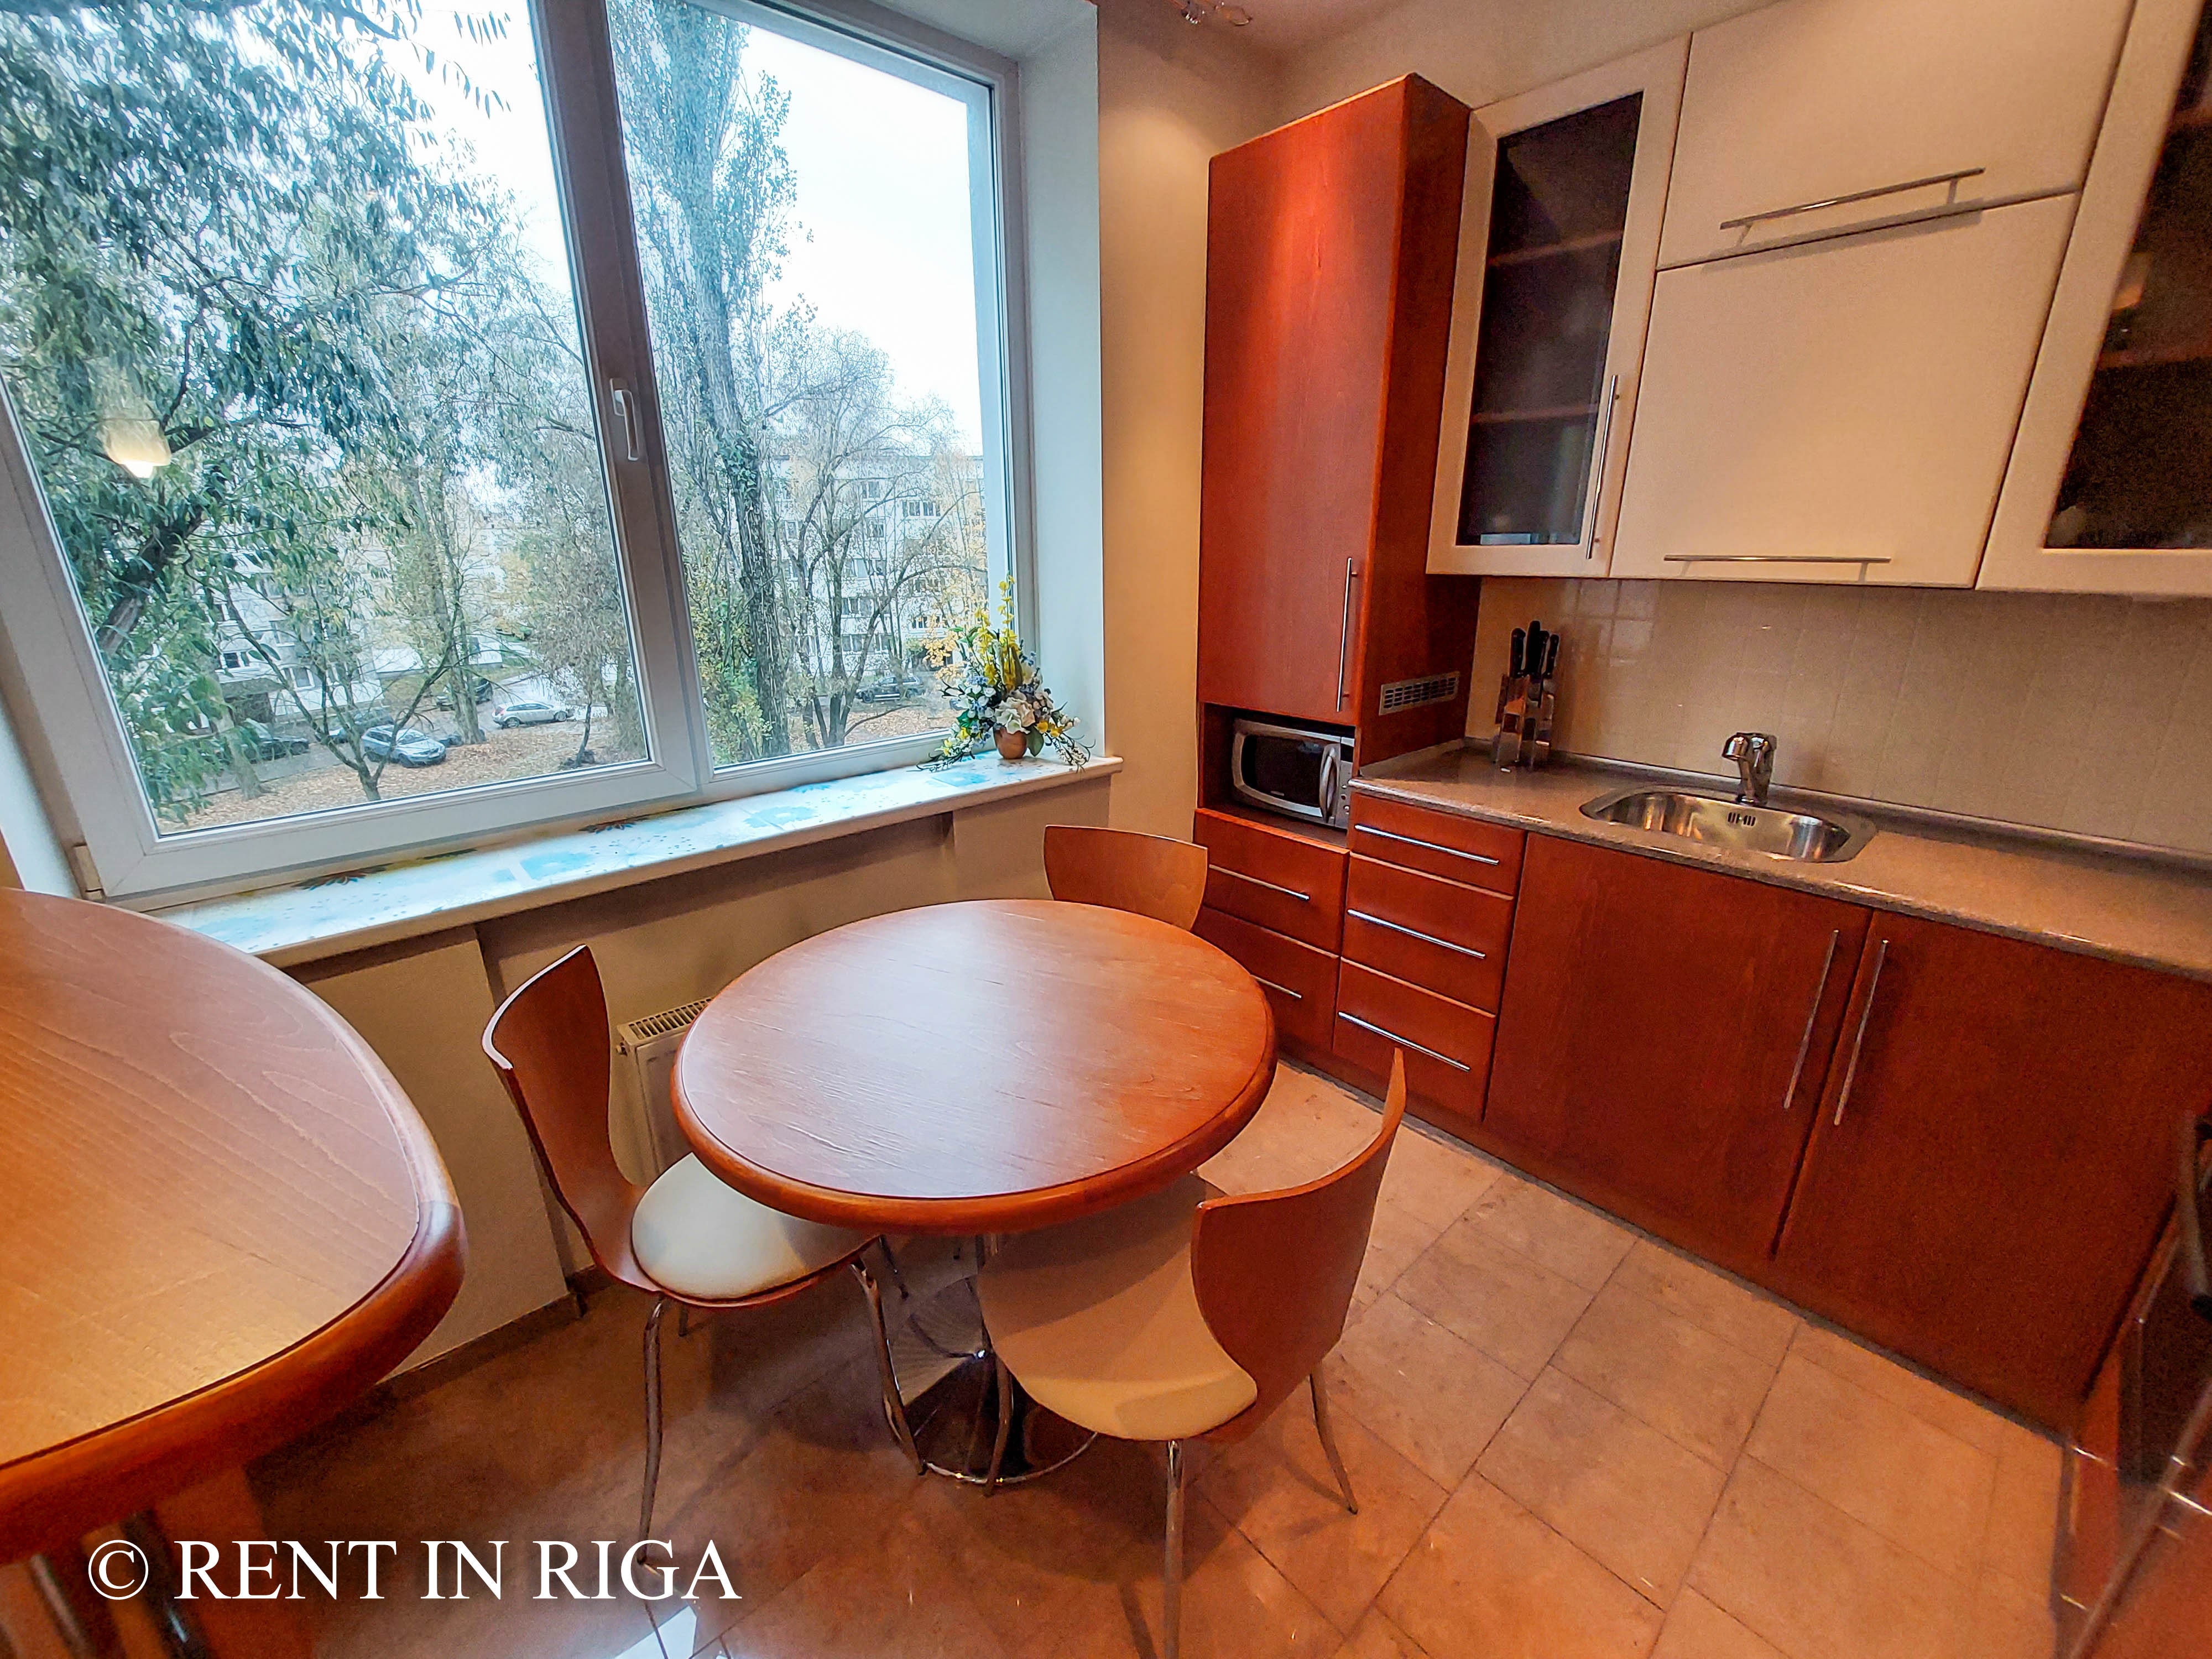 Apartment for rent, Stirnu street 13a - Image 1